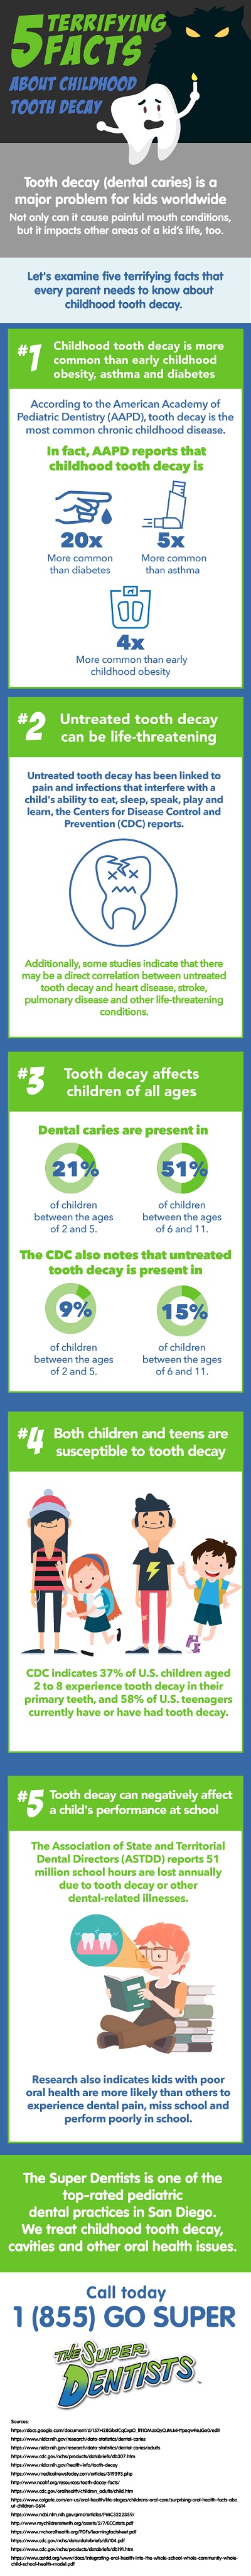 Terrifying Facts About Childhood Tooth Decay Infographic | The Super Dentists